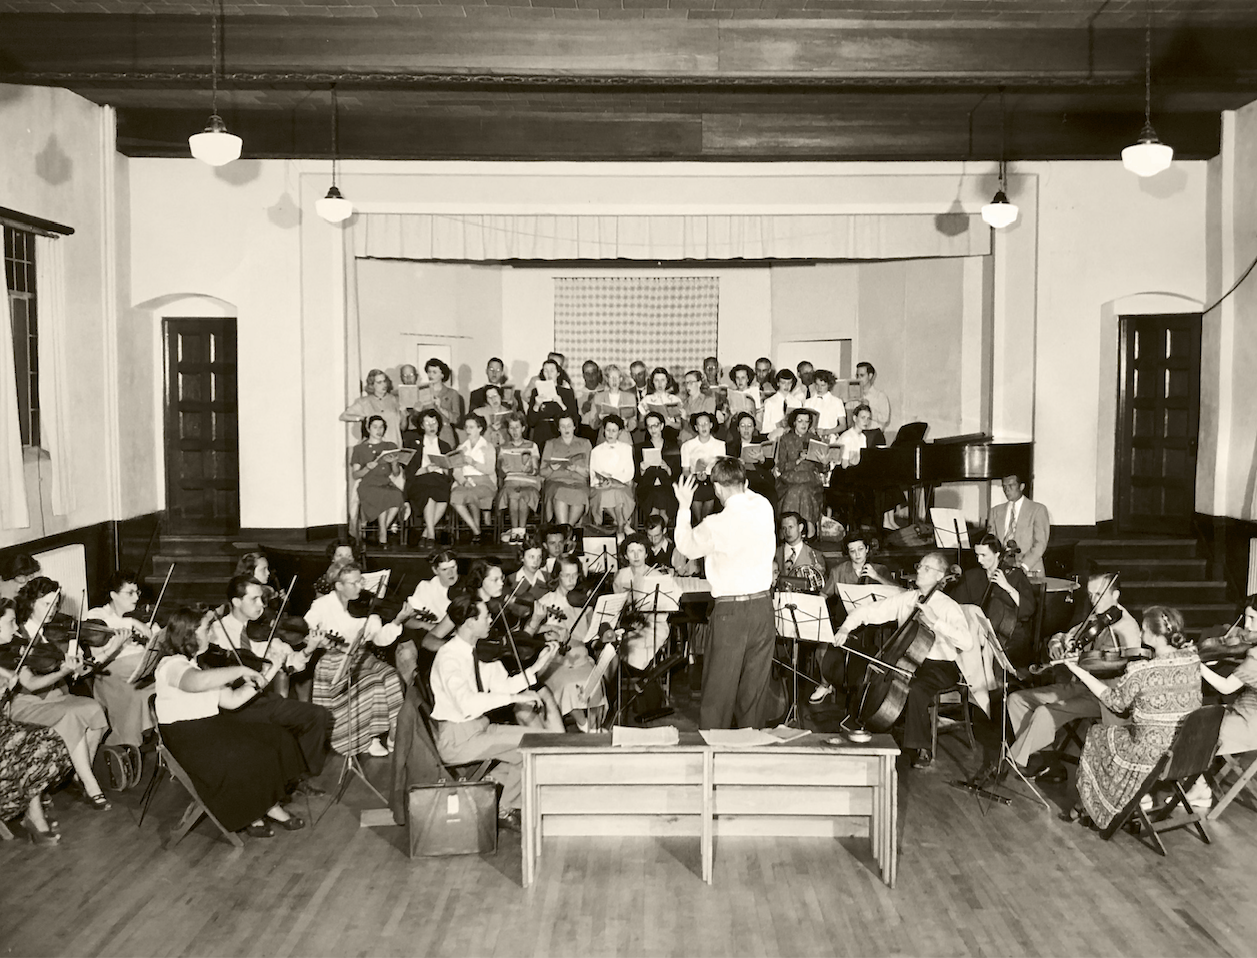 https://trinitycathedral.com/wp-content/uploads/2022/01/Choir-and-orchestra-In-Atwood-hall-1950.png